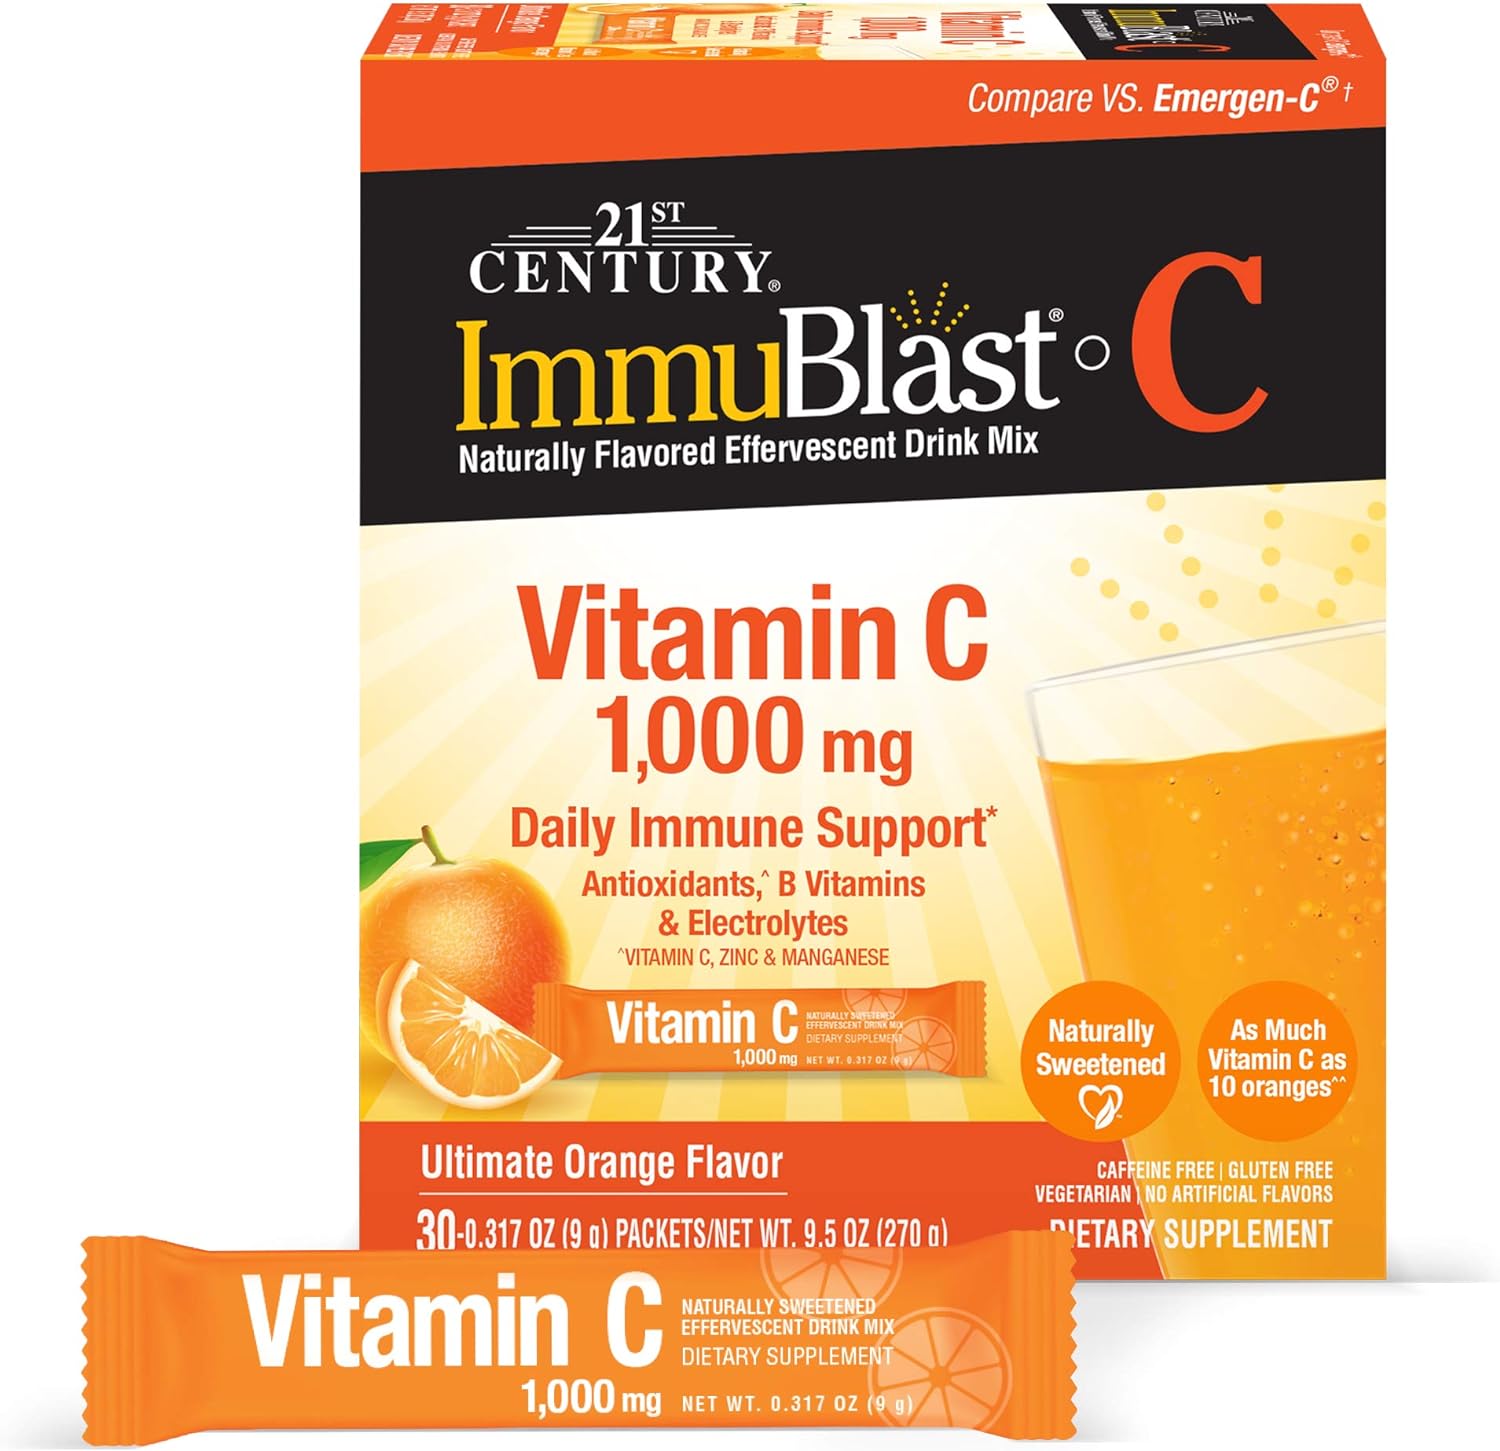 21st Century Immublast C Effervescent Drink Mix Packets, Ultimate Orange, 9.5 Ounce, Pack of 30